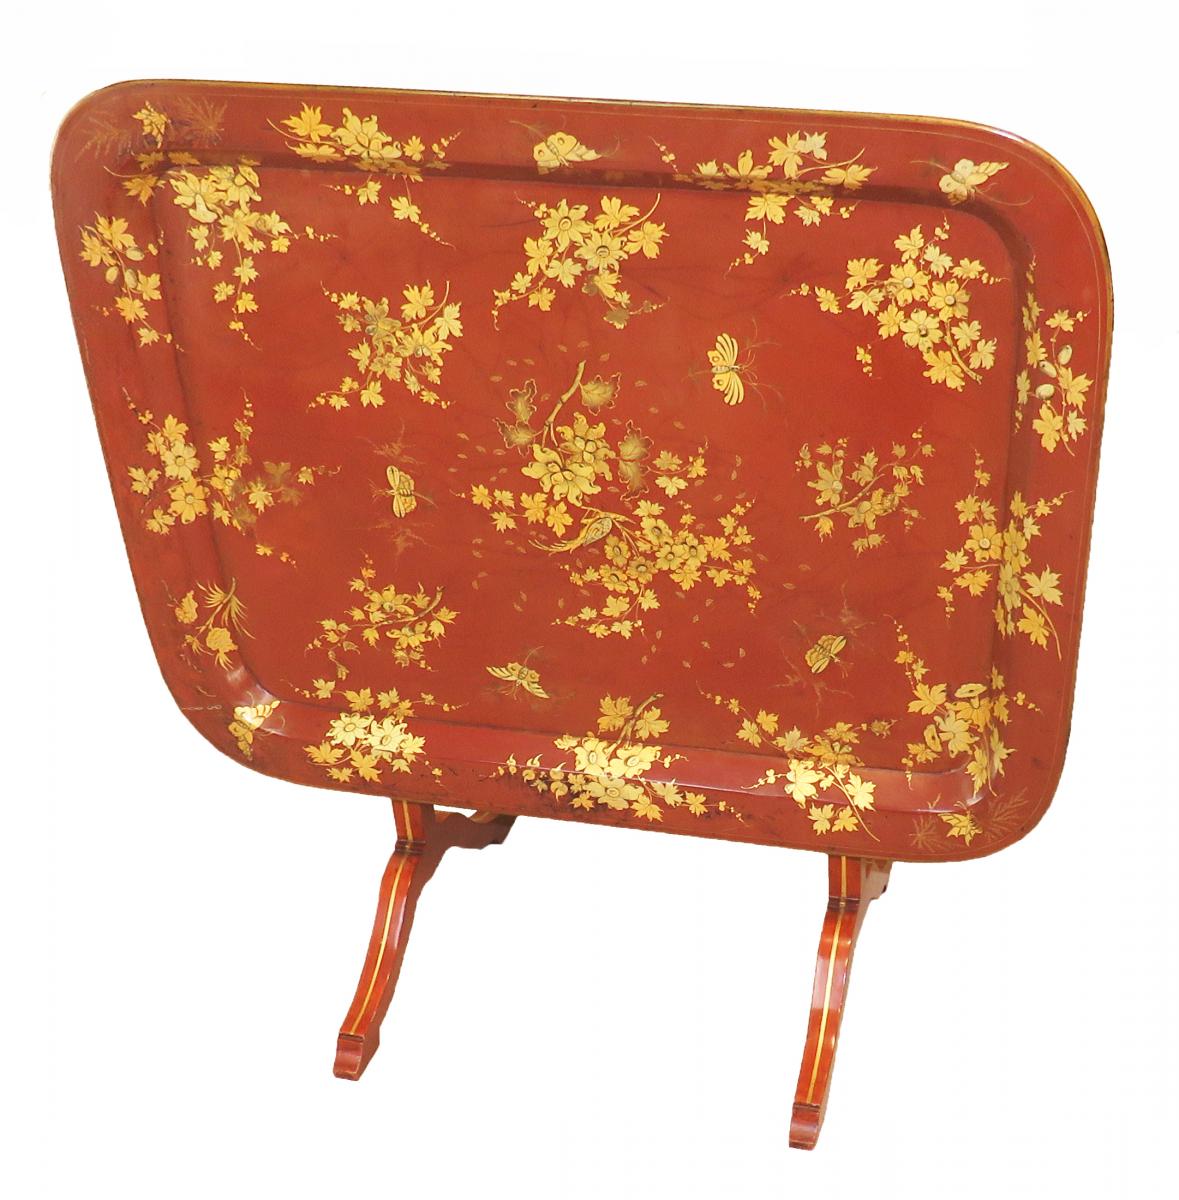 Mid 19th Century Red English Papier Mache Tray Table On Stand 